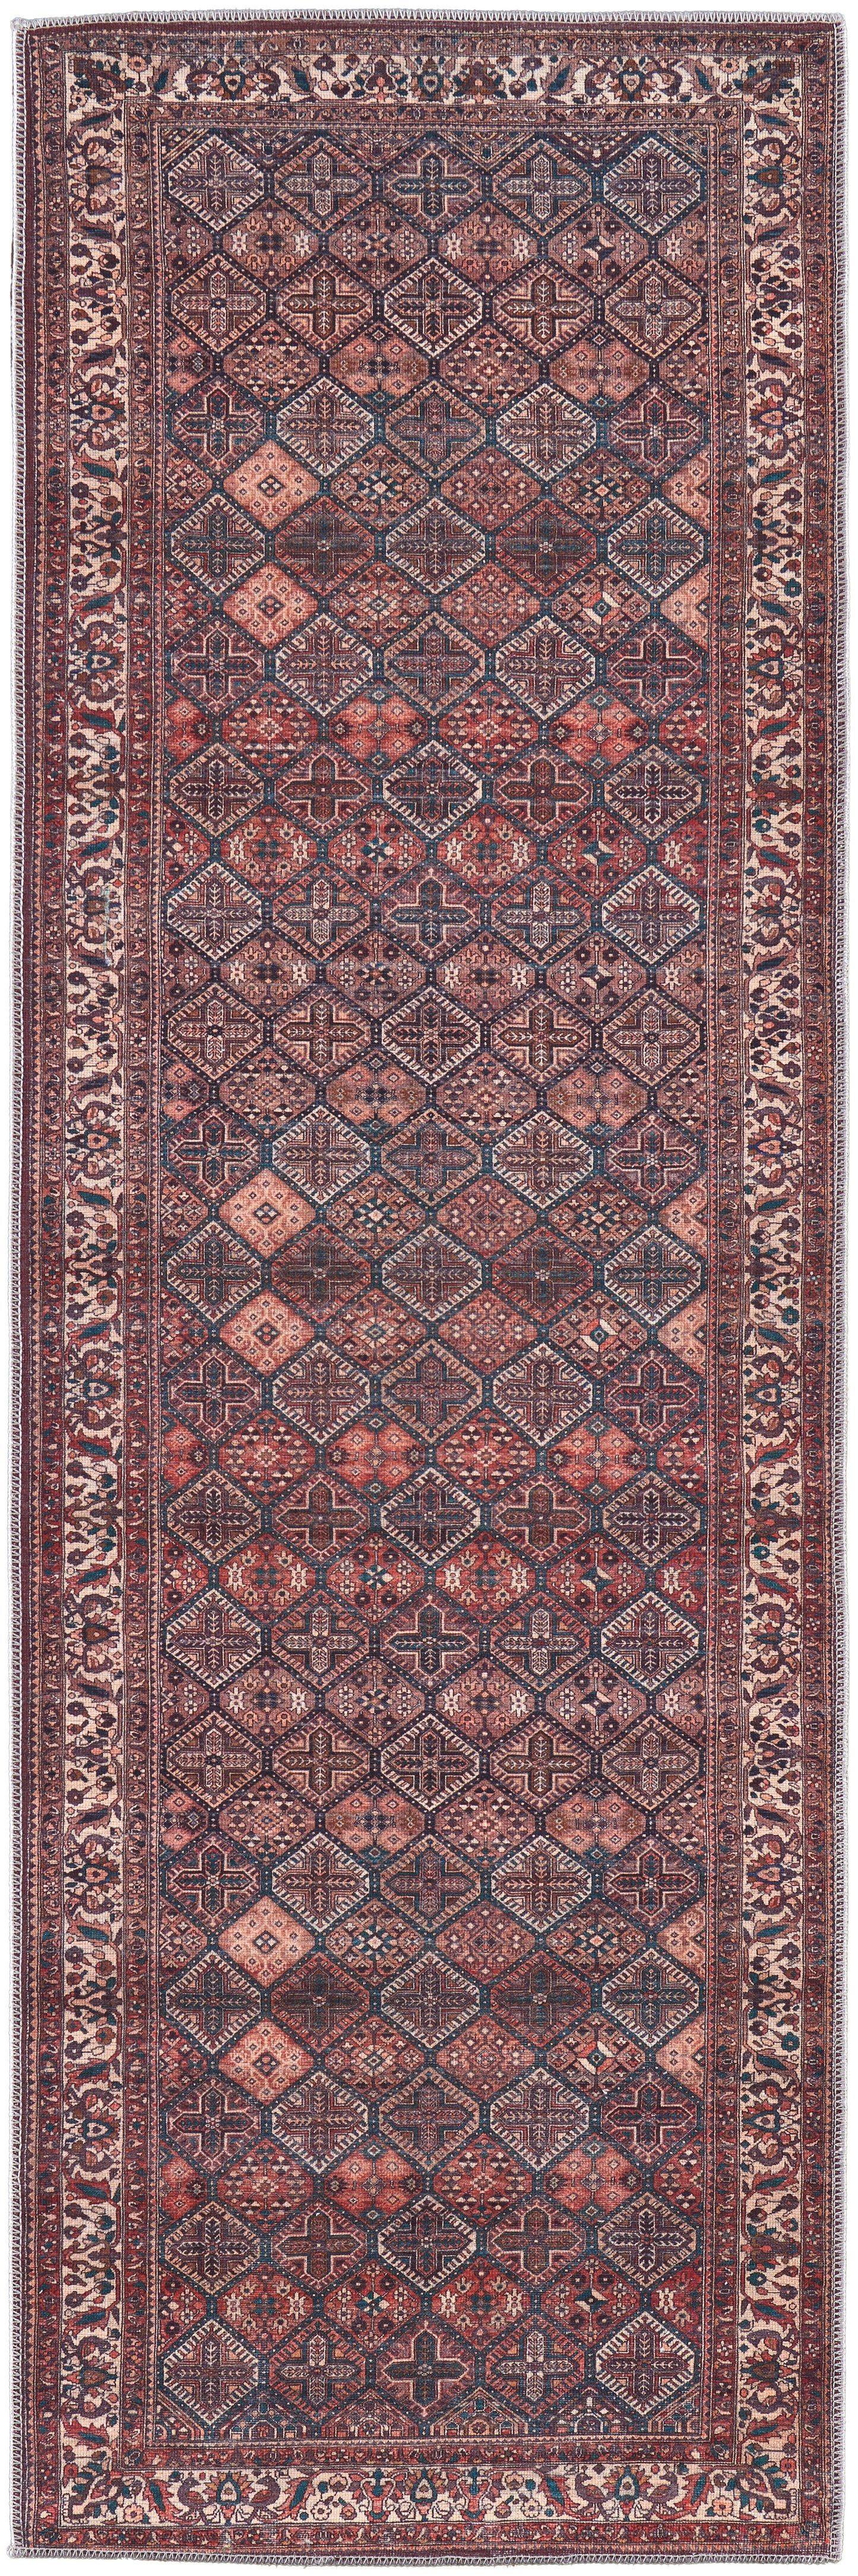 Rawlins 39HKF Power Loomed Synthetic Blend Indoor Area Rug by Feizy Rugs